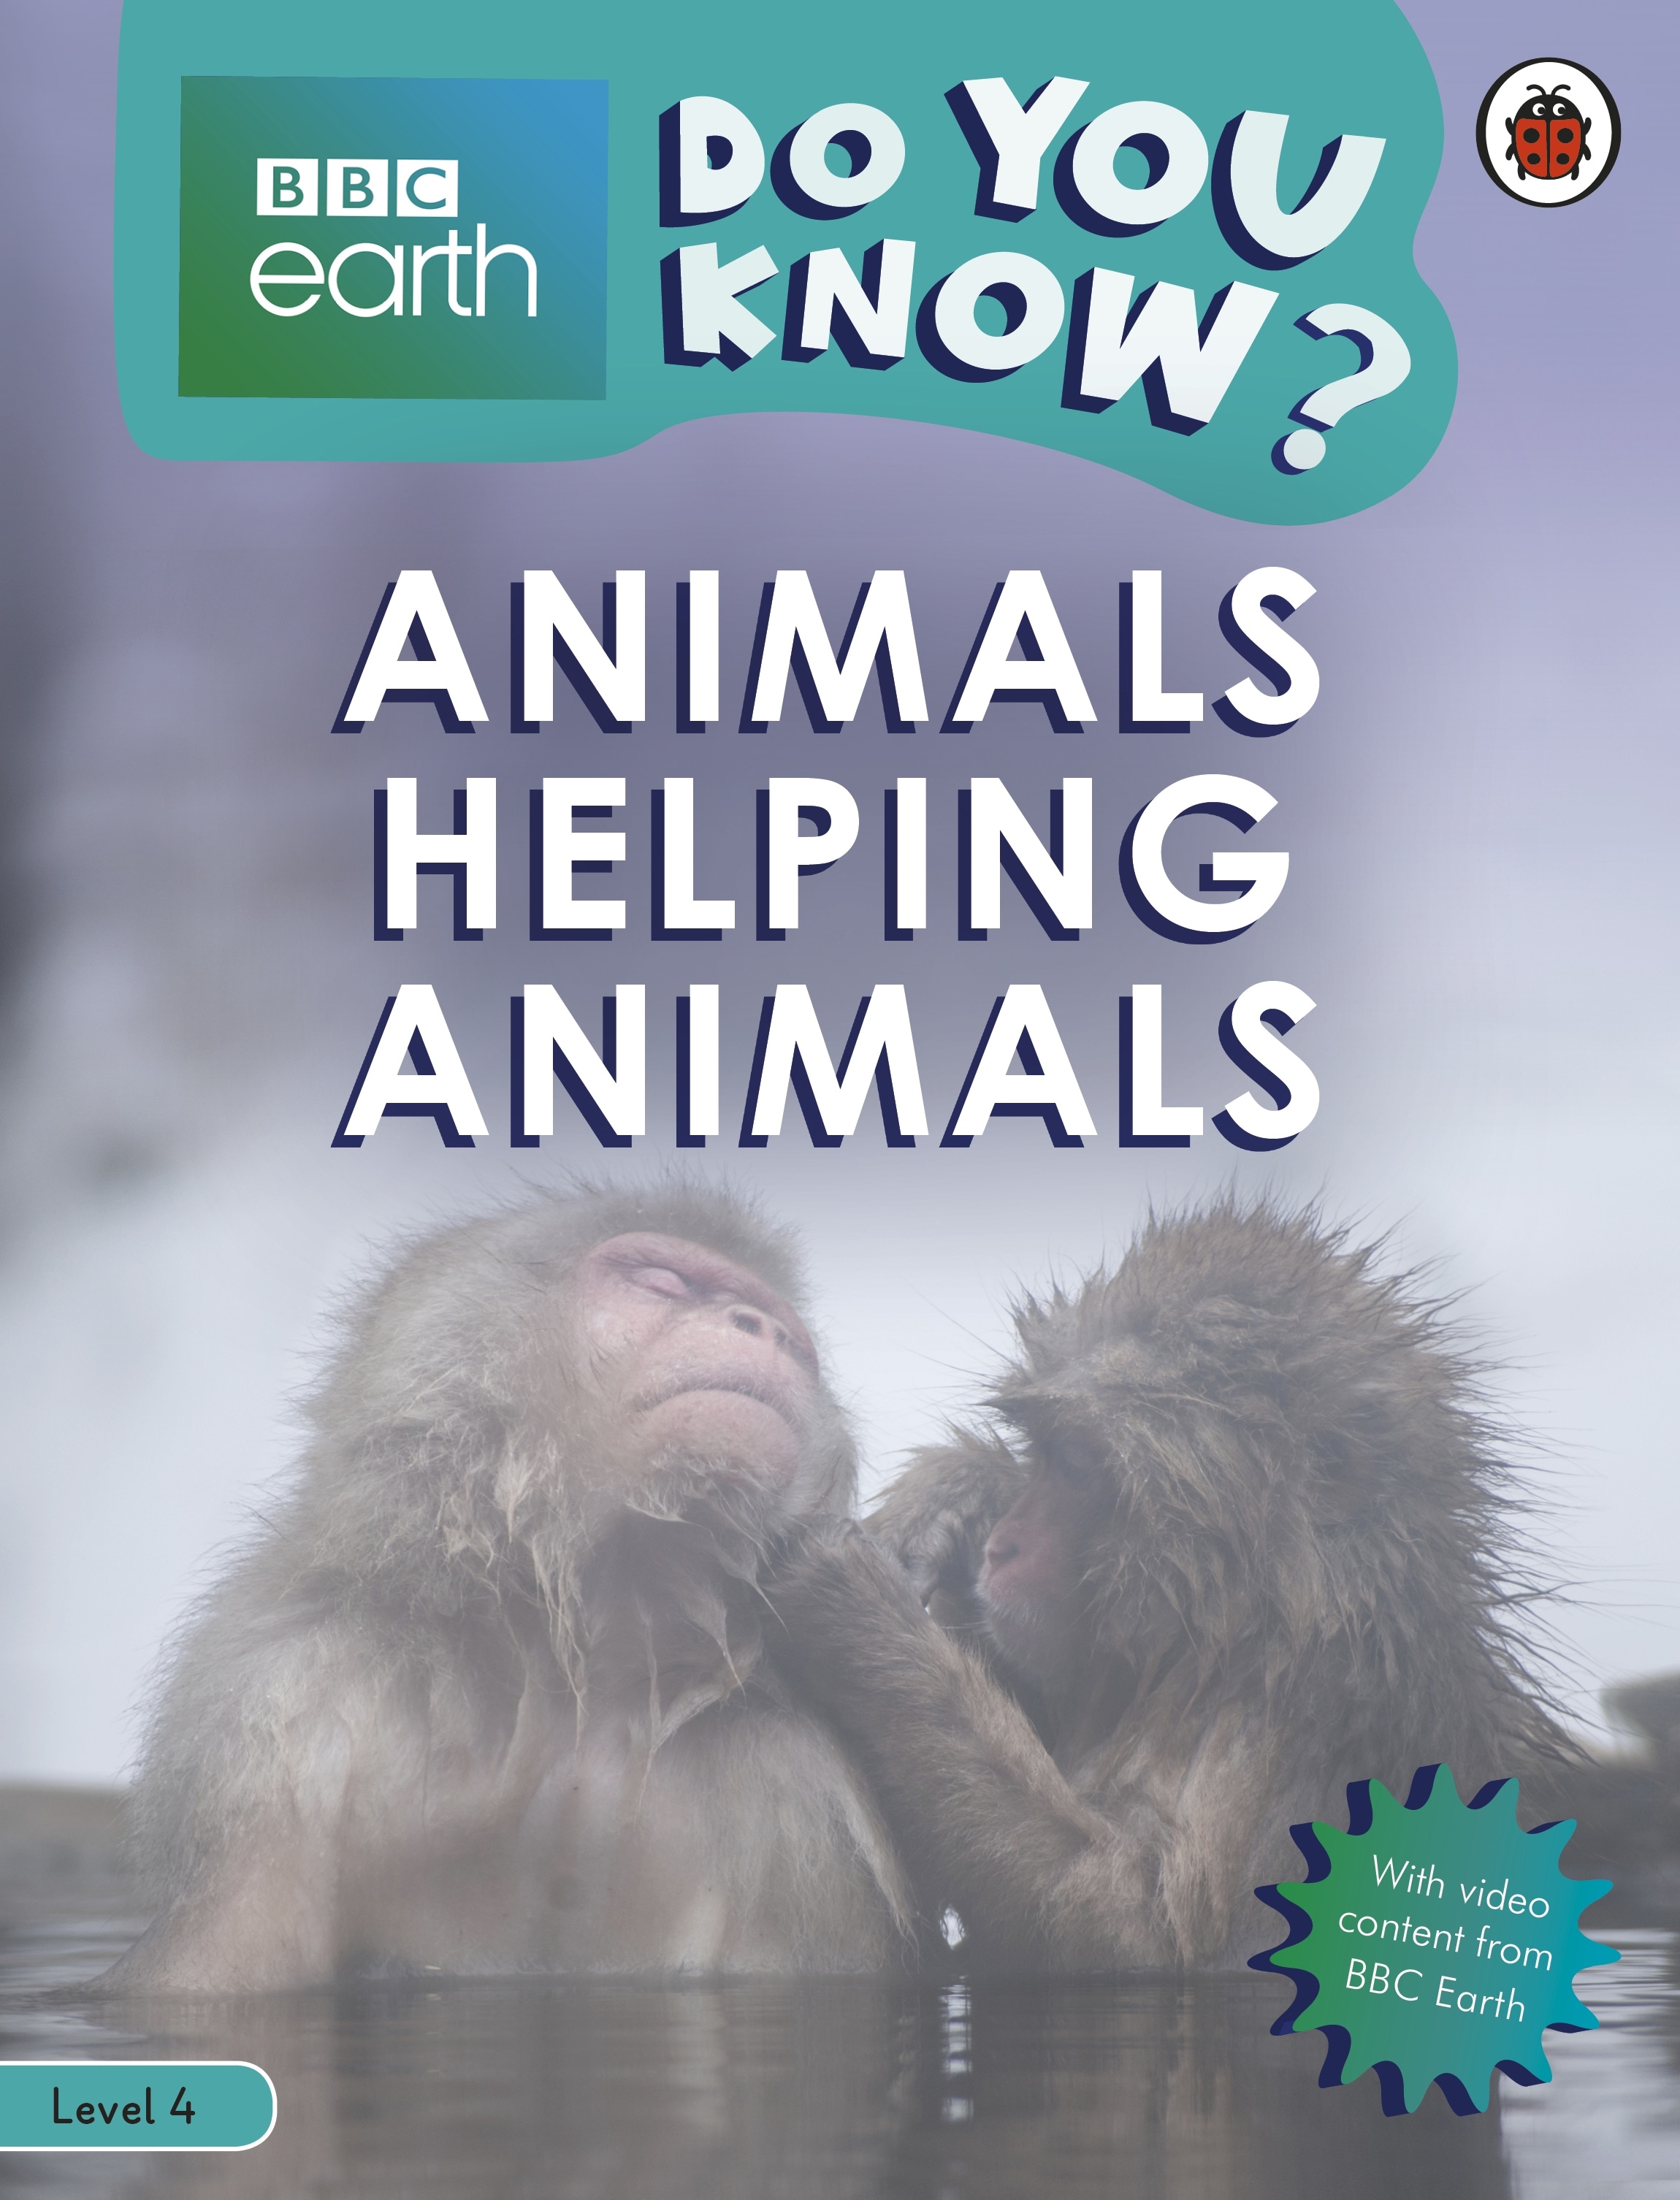 Do You Know? Level 4 – BBC Earth Animals Helping Animals